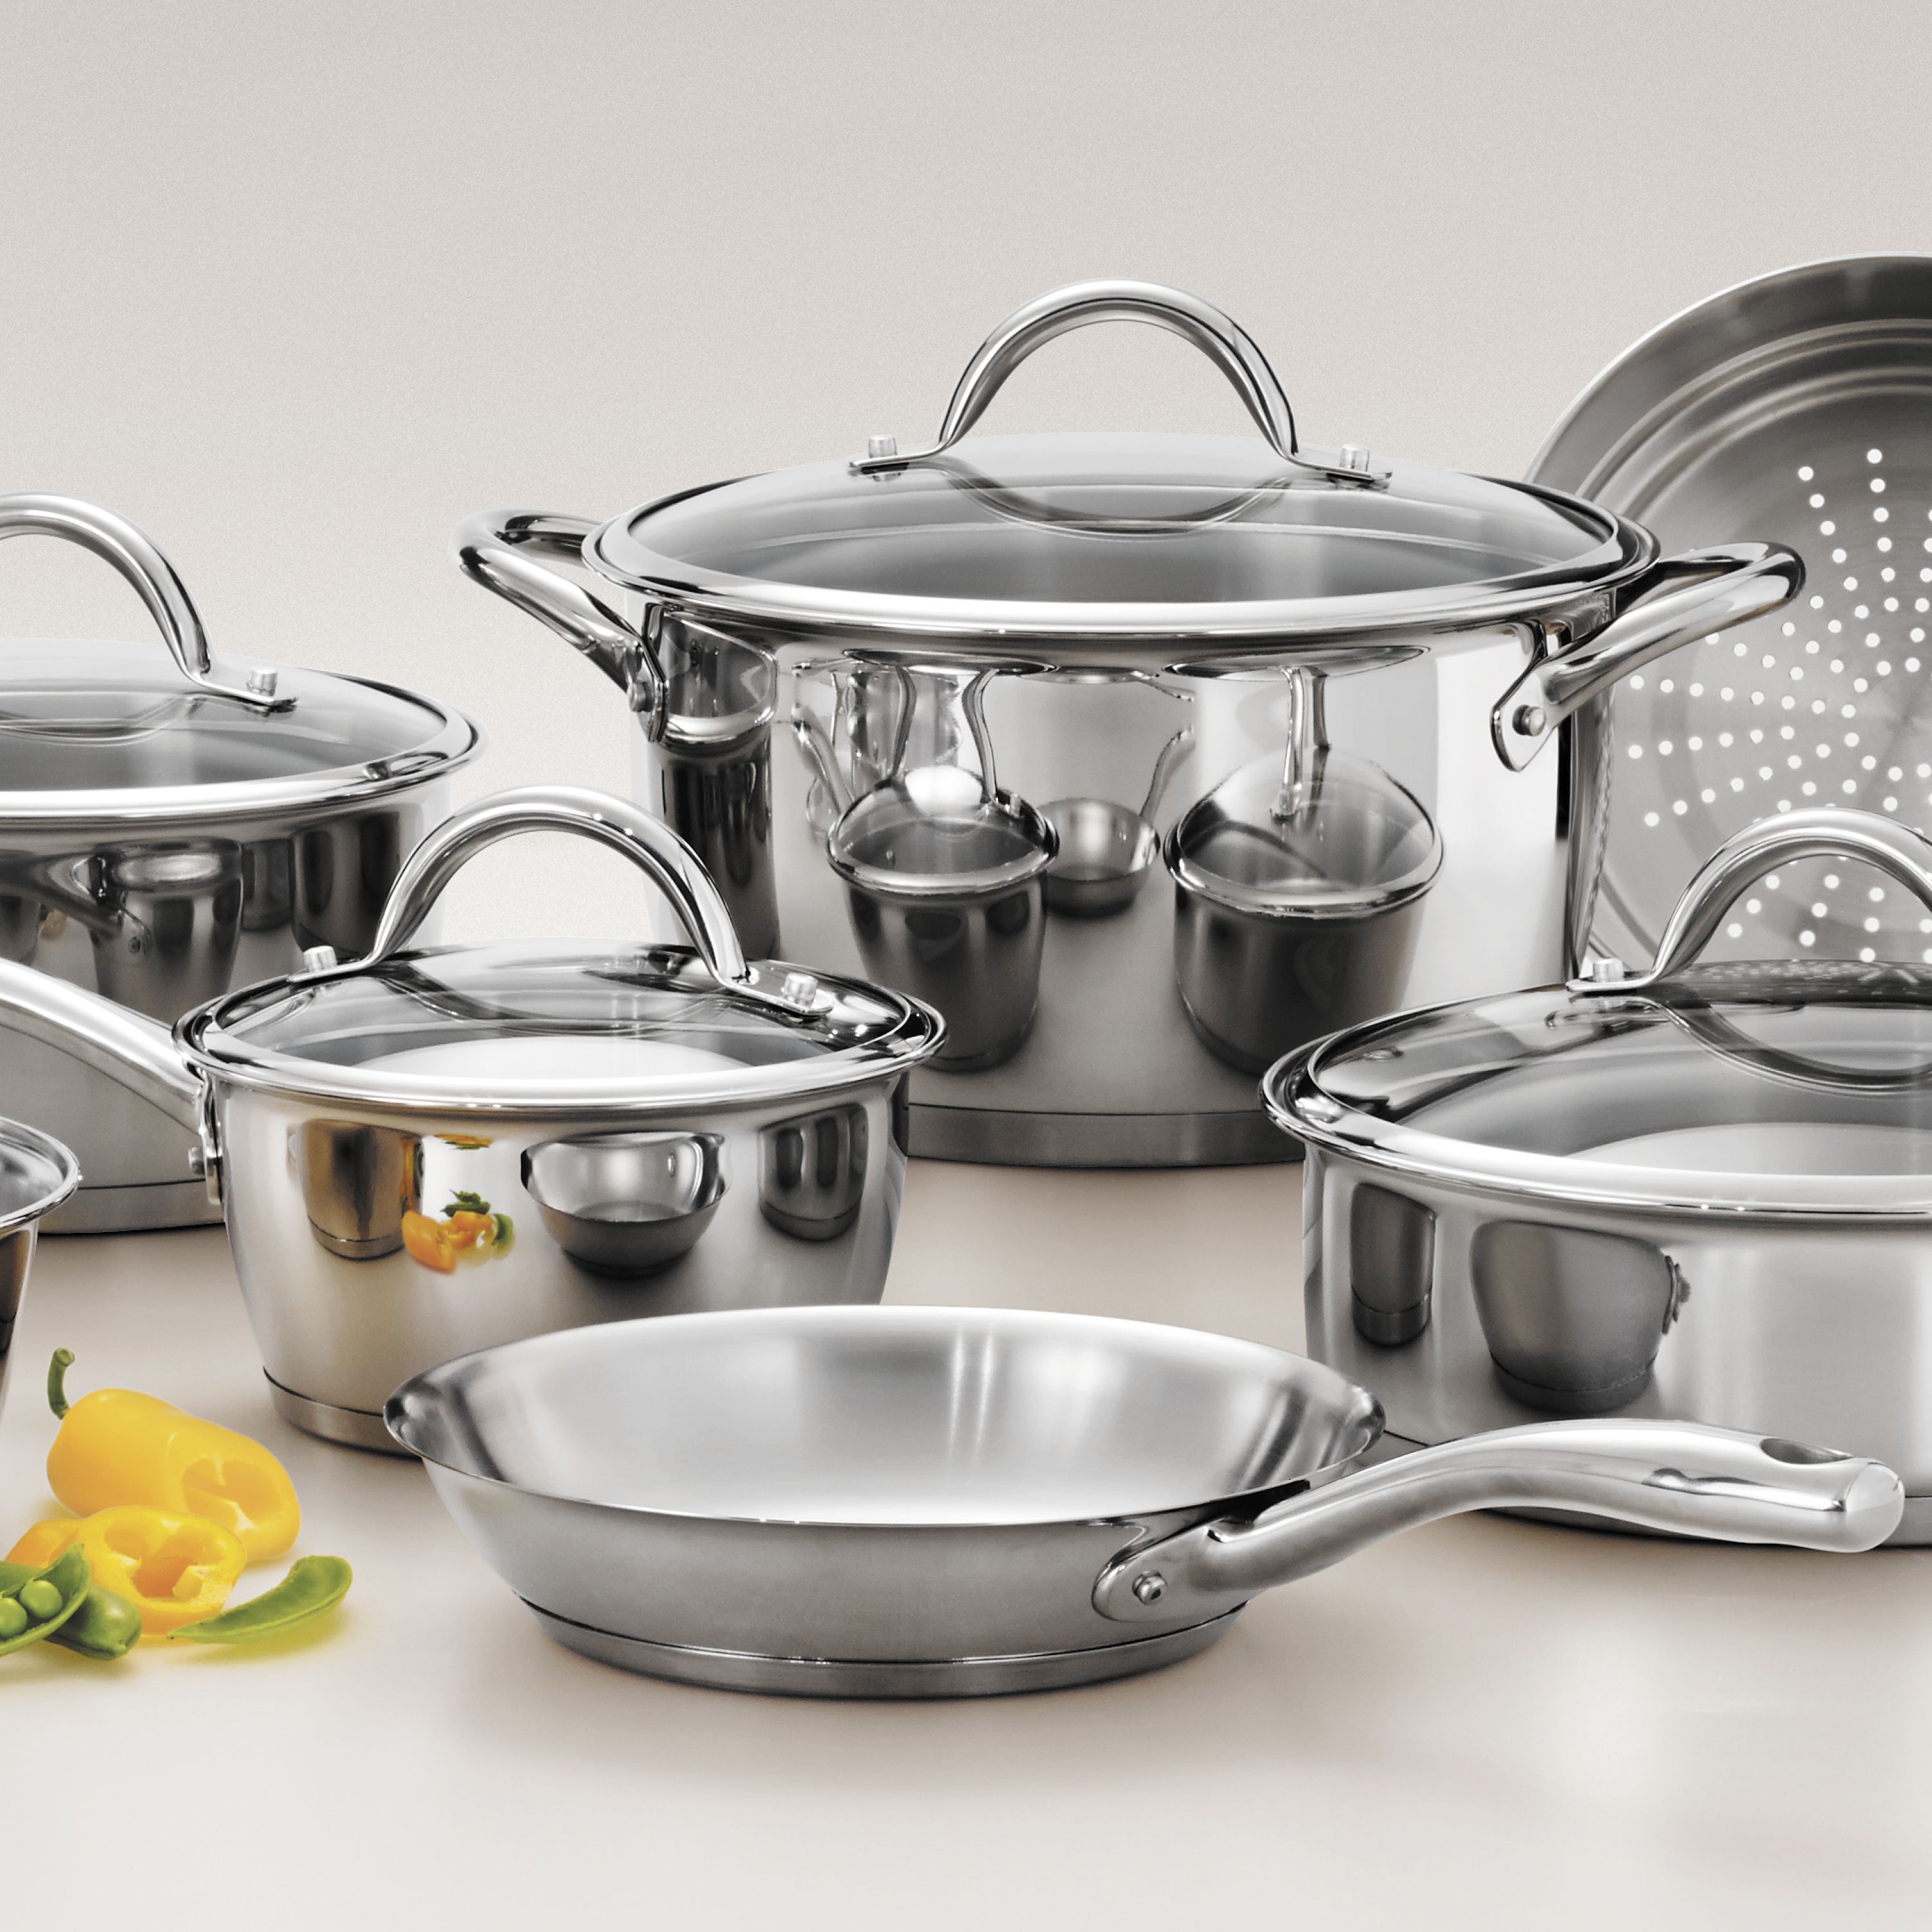 Tramontina Gourmet Stainless Steel Tri-Ply Base Cookware Set, 12 Piece - image 6 of 7